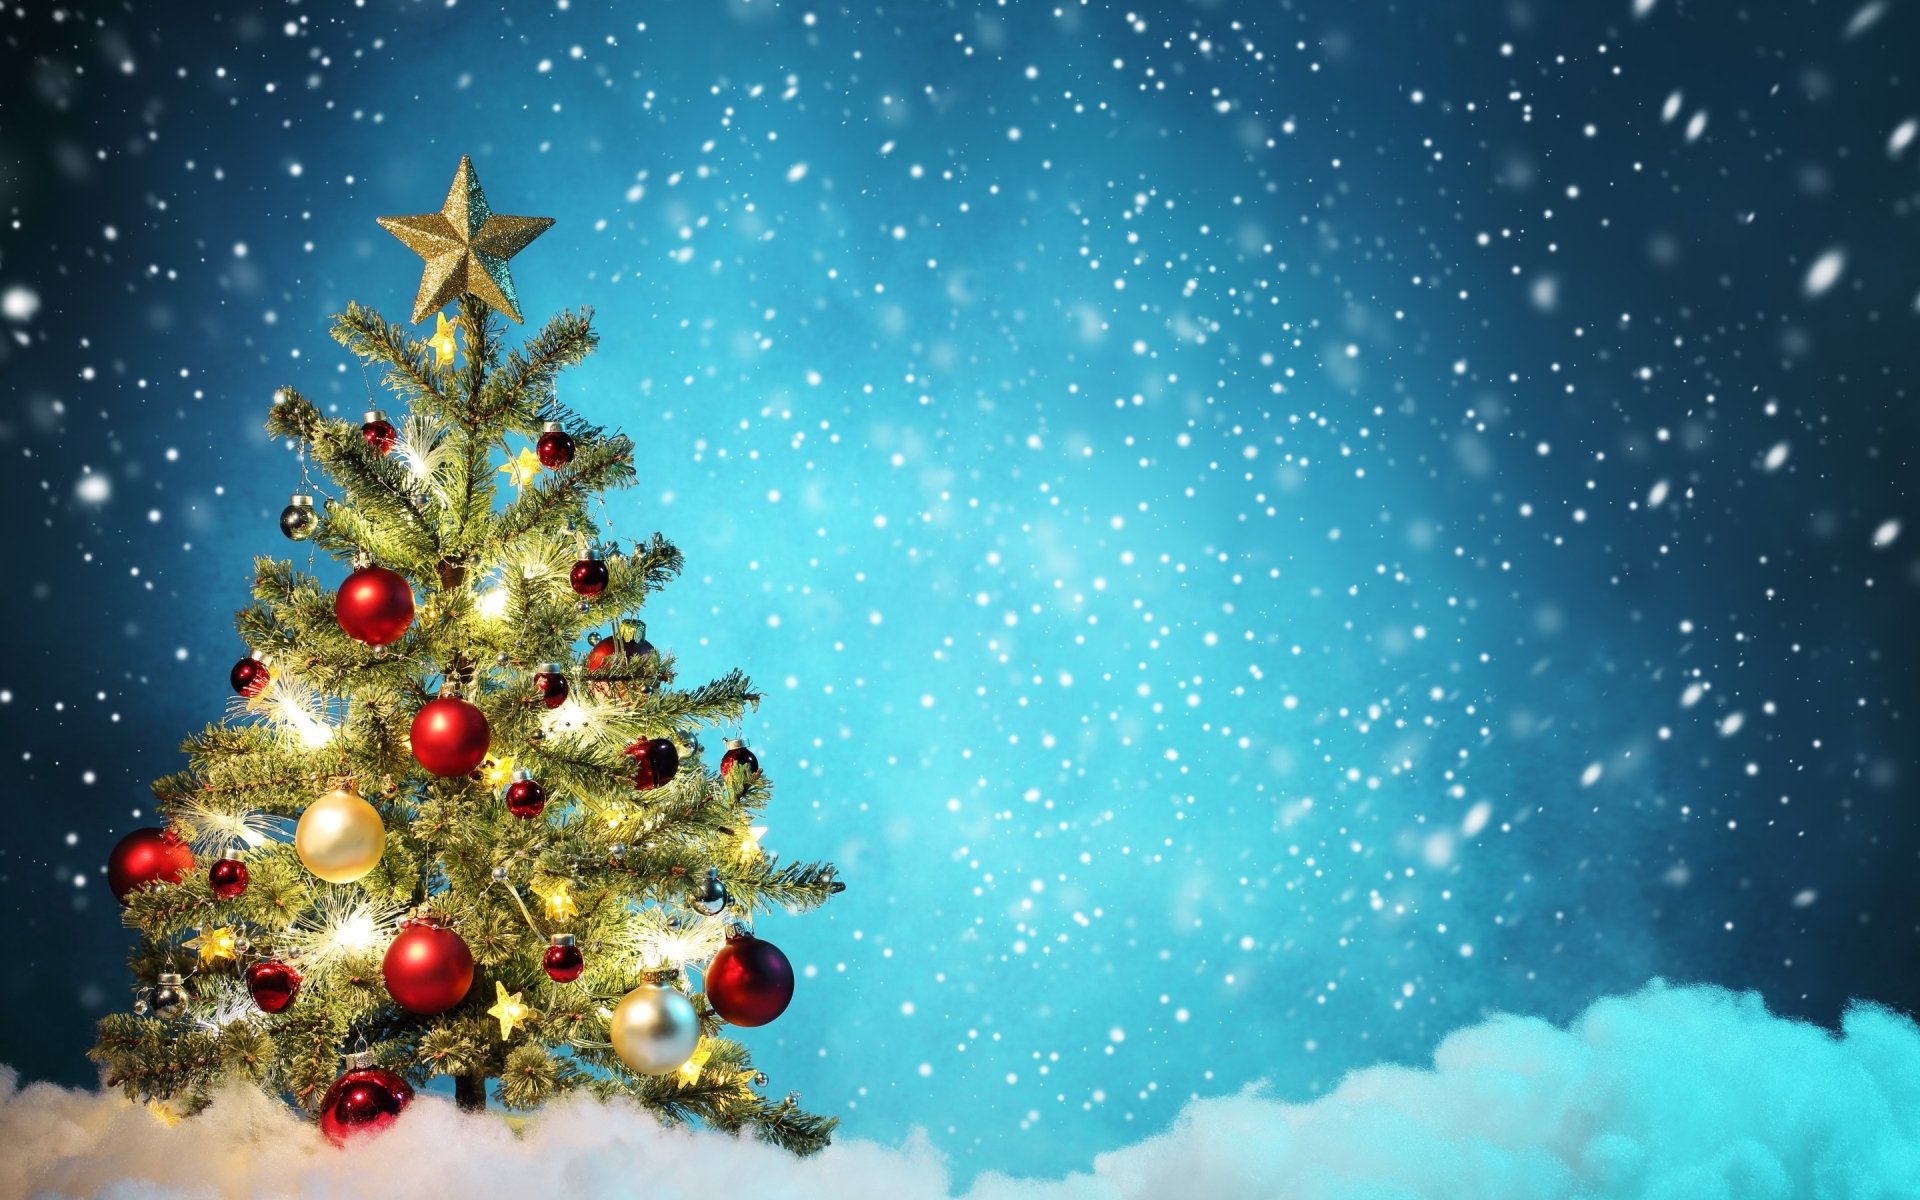 Christmas Background Hd Images Free Download : Christmas Wallpaper Hd ...